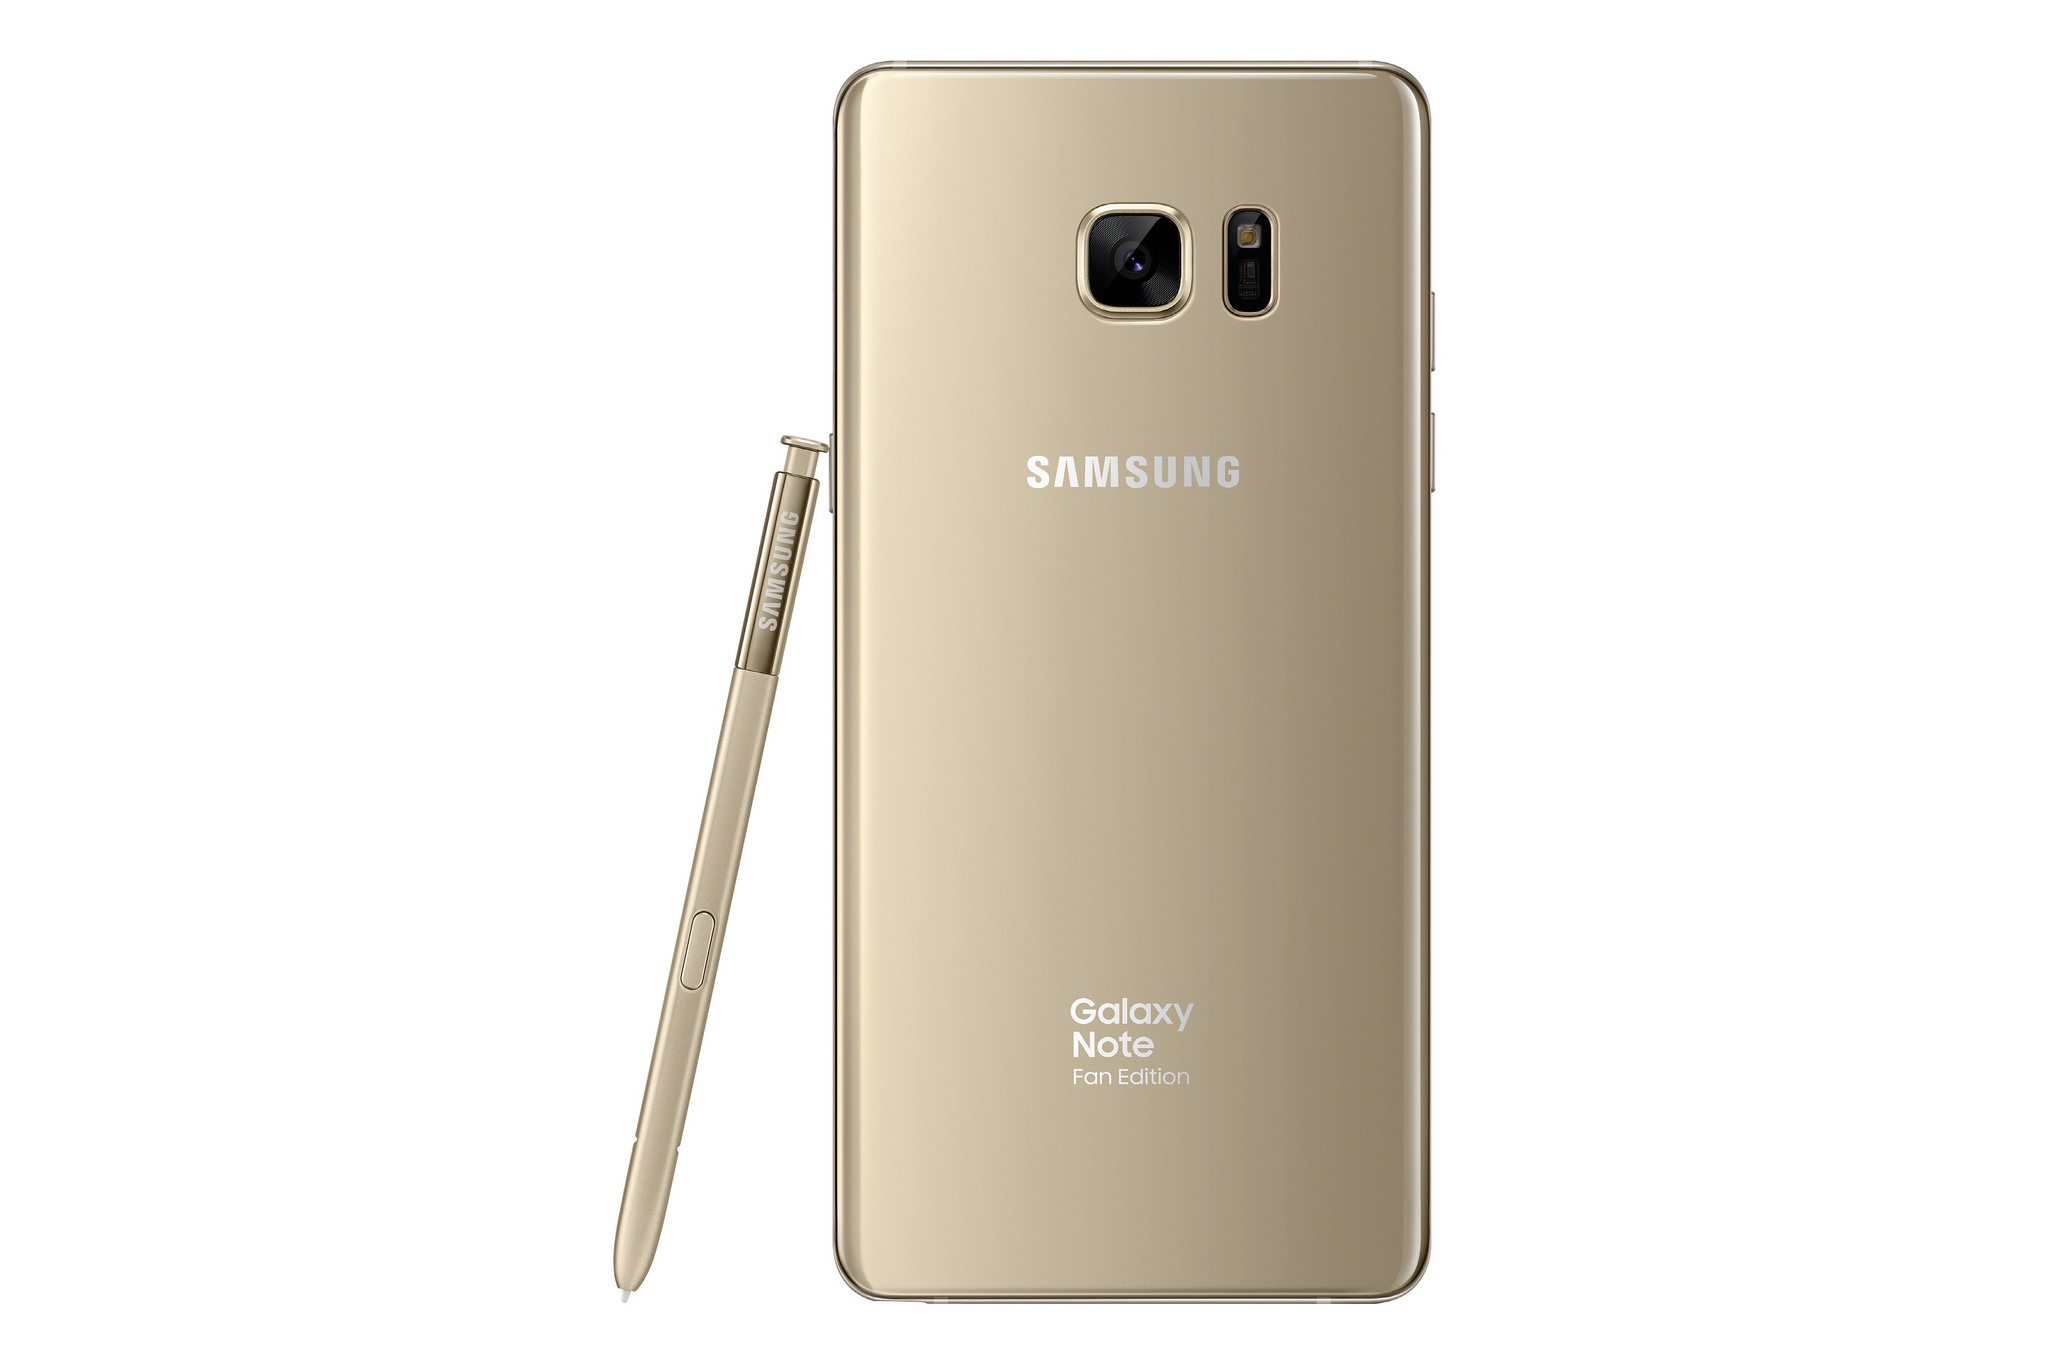 Samsung Galaxy Note Fan Edition is official, goes on sale in South Korea on July 7 - SamMobile